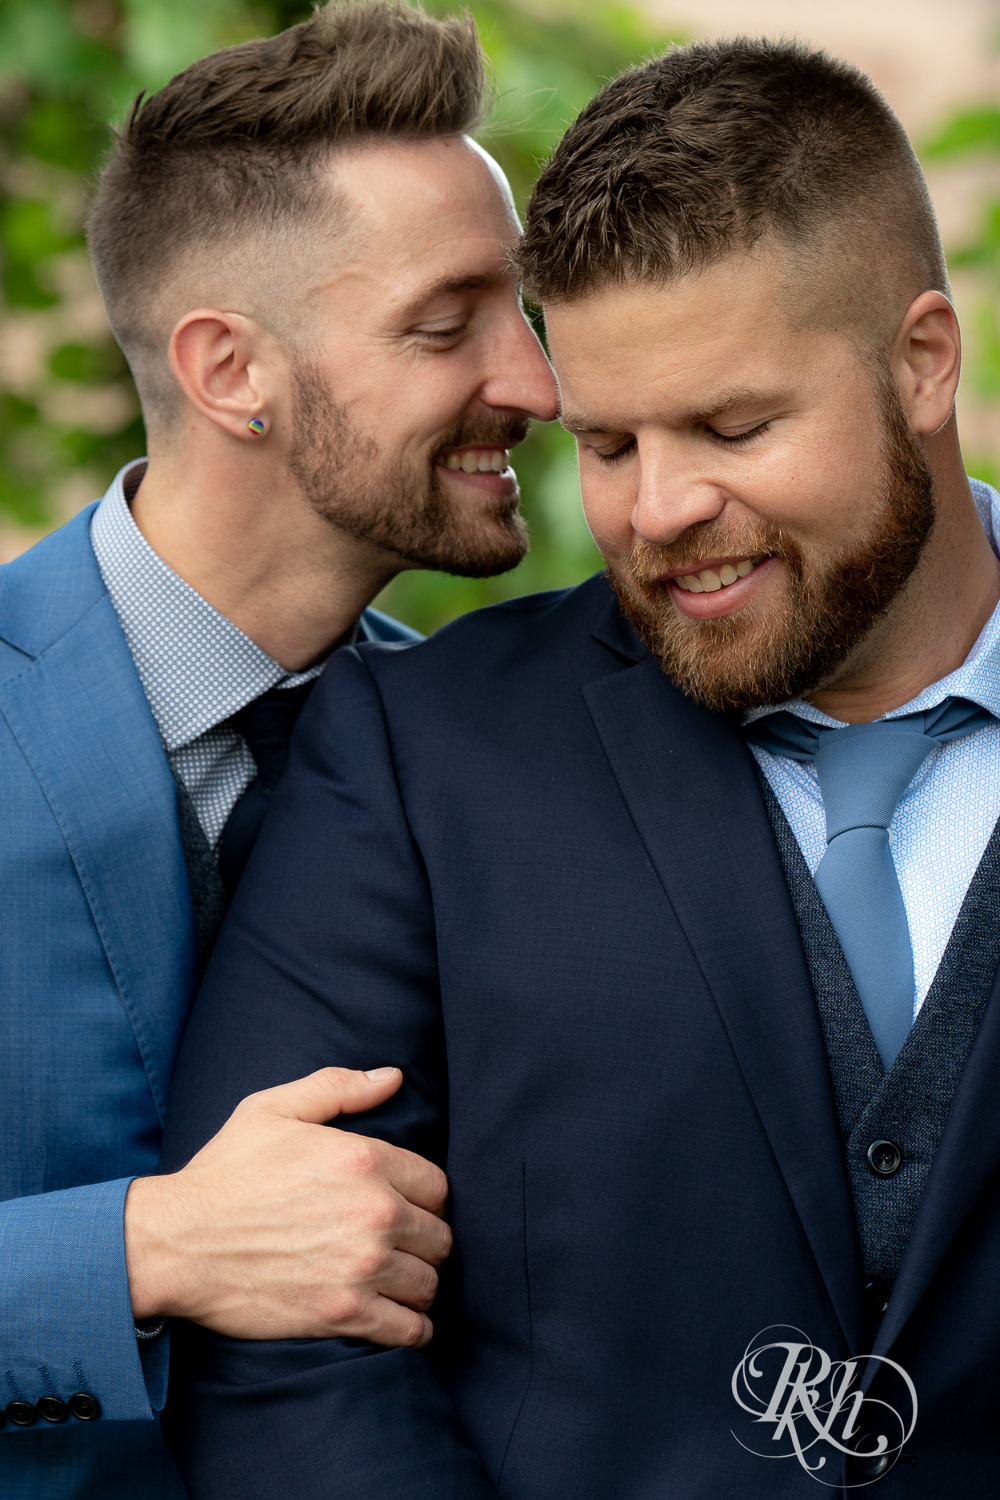 Gay grooms in blue suits smiling on sunny wedding day at Nicollet Island in Minneapolis, Minnesota.